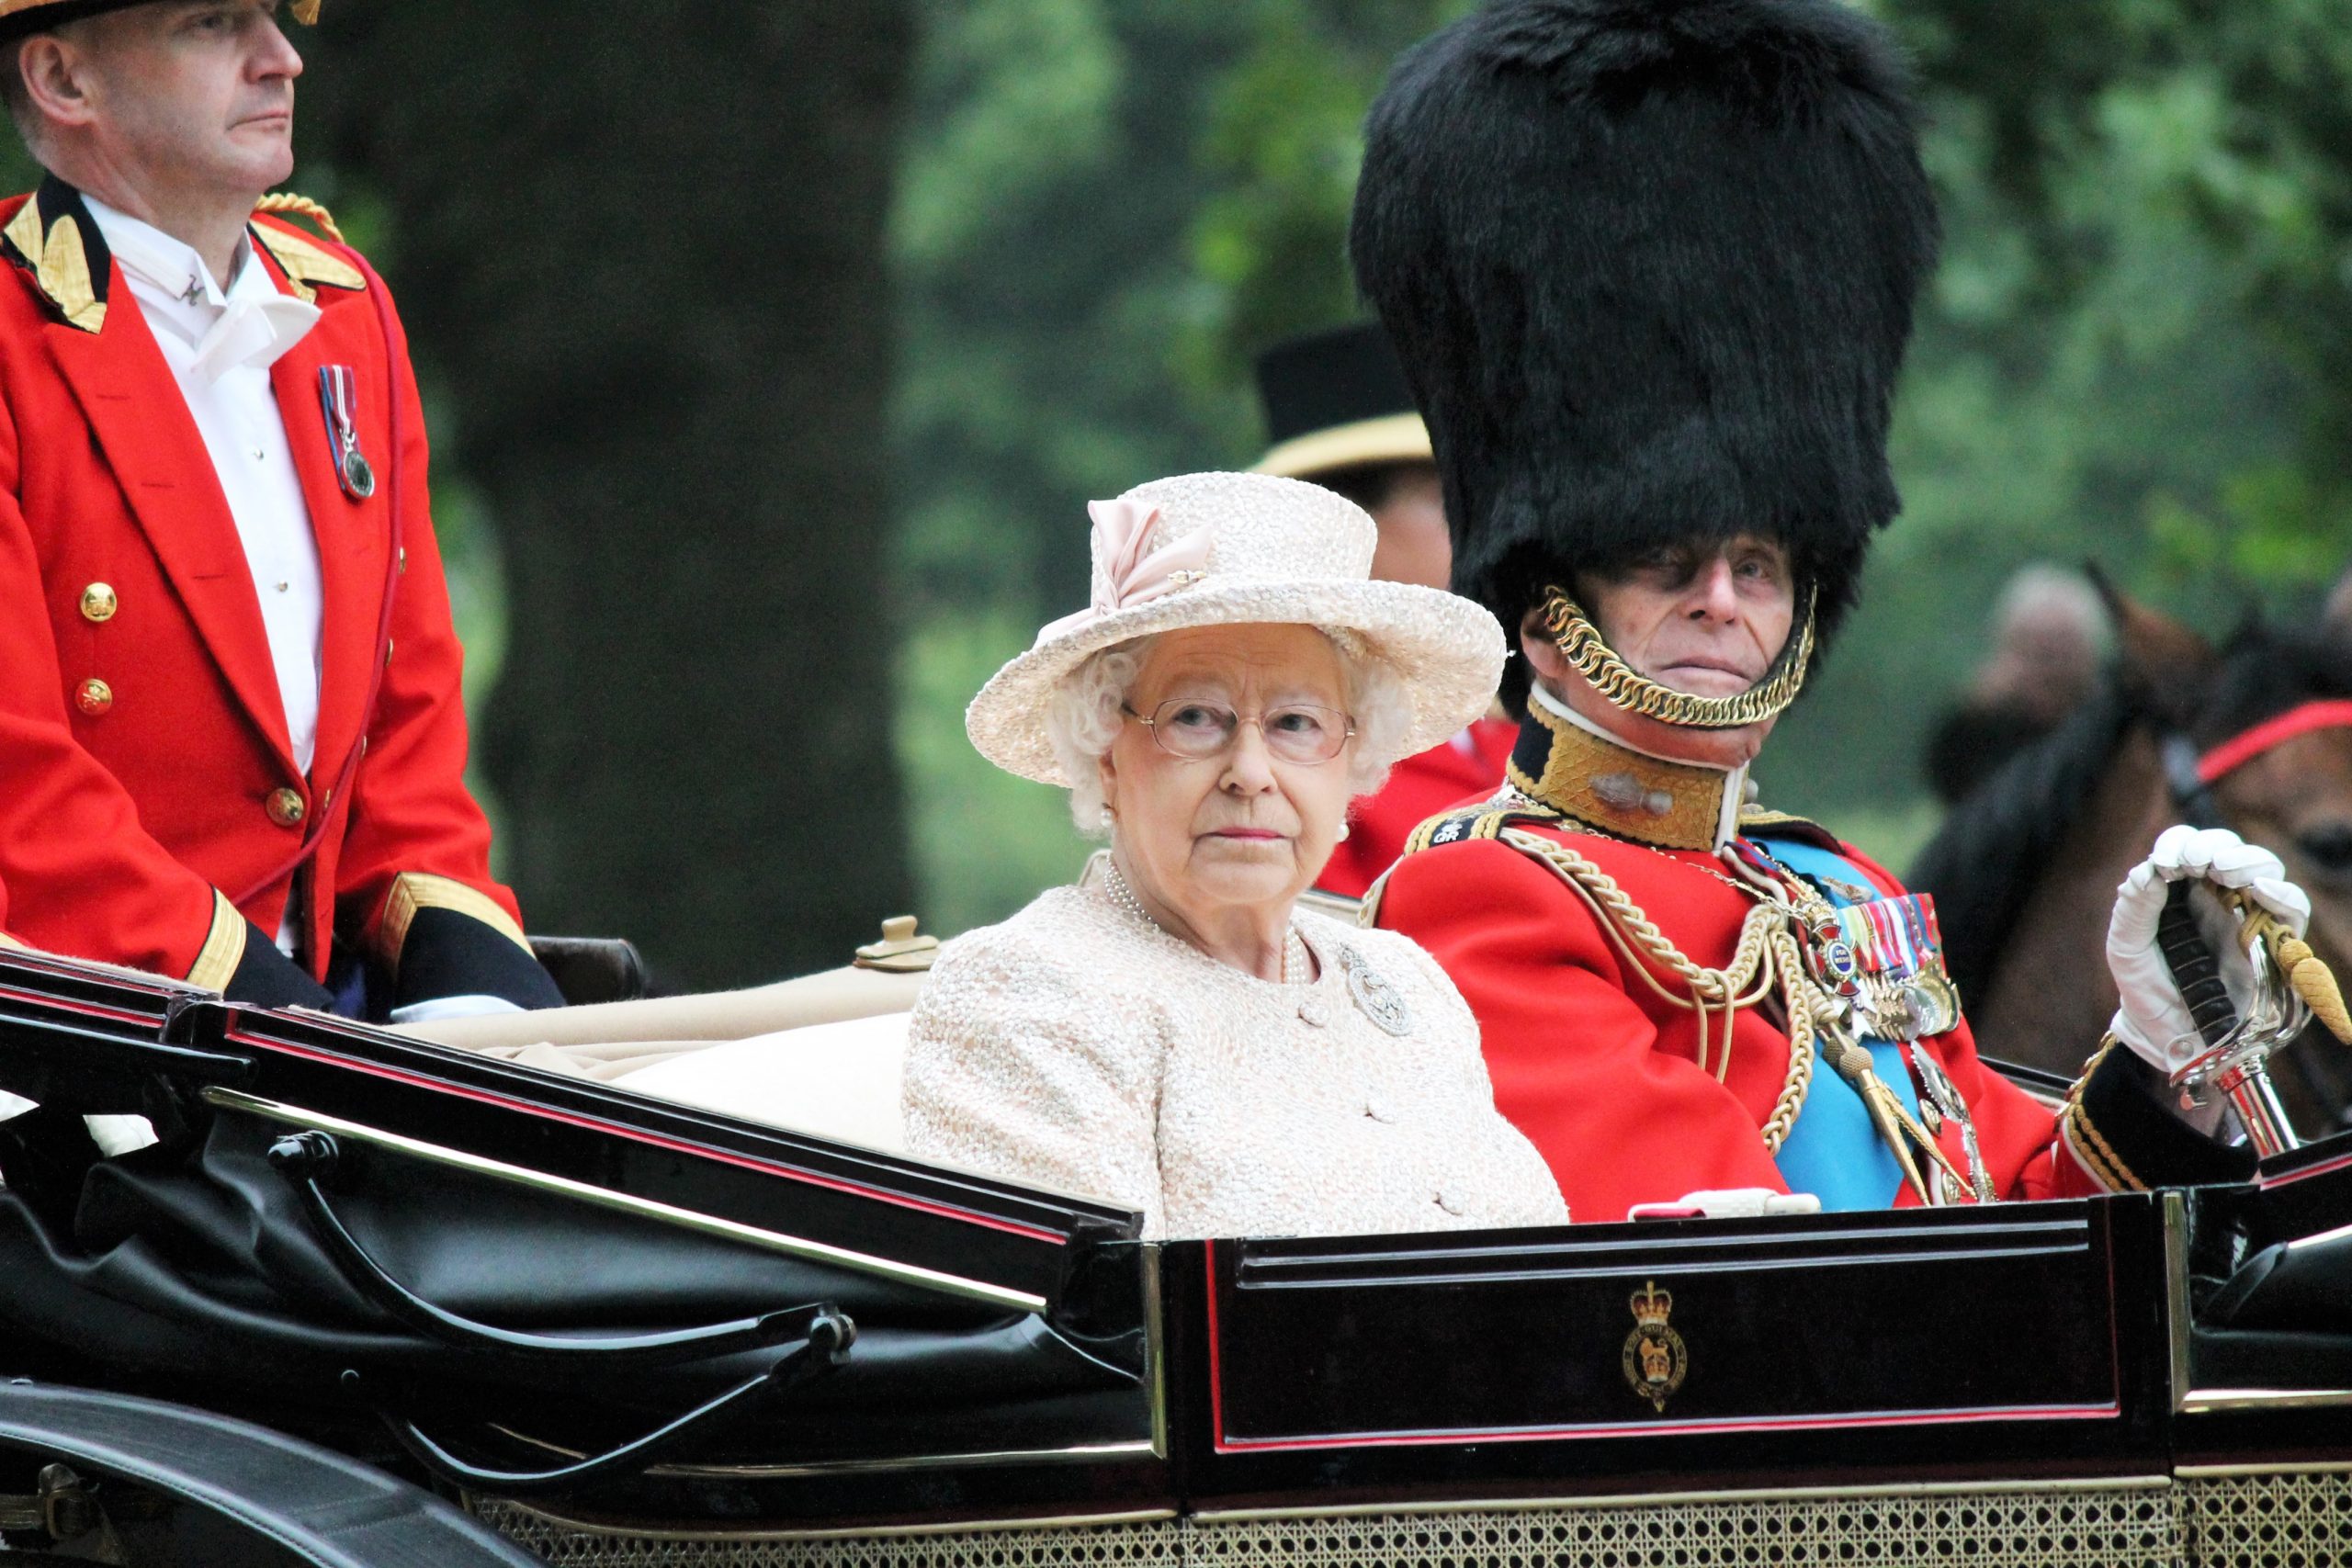 The Queen's guards escorting Queen Elizabeth II back to Buckingham Palace in her carriage.